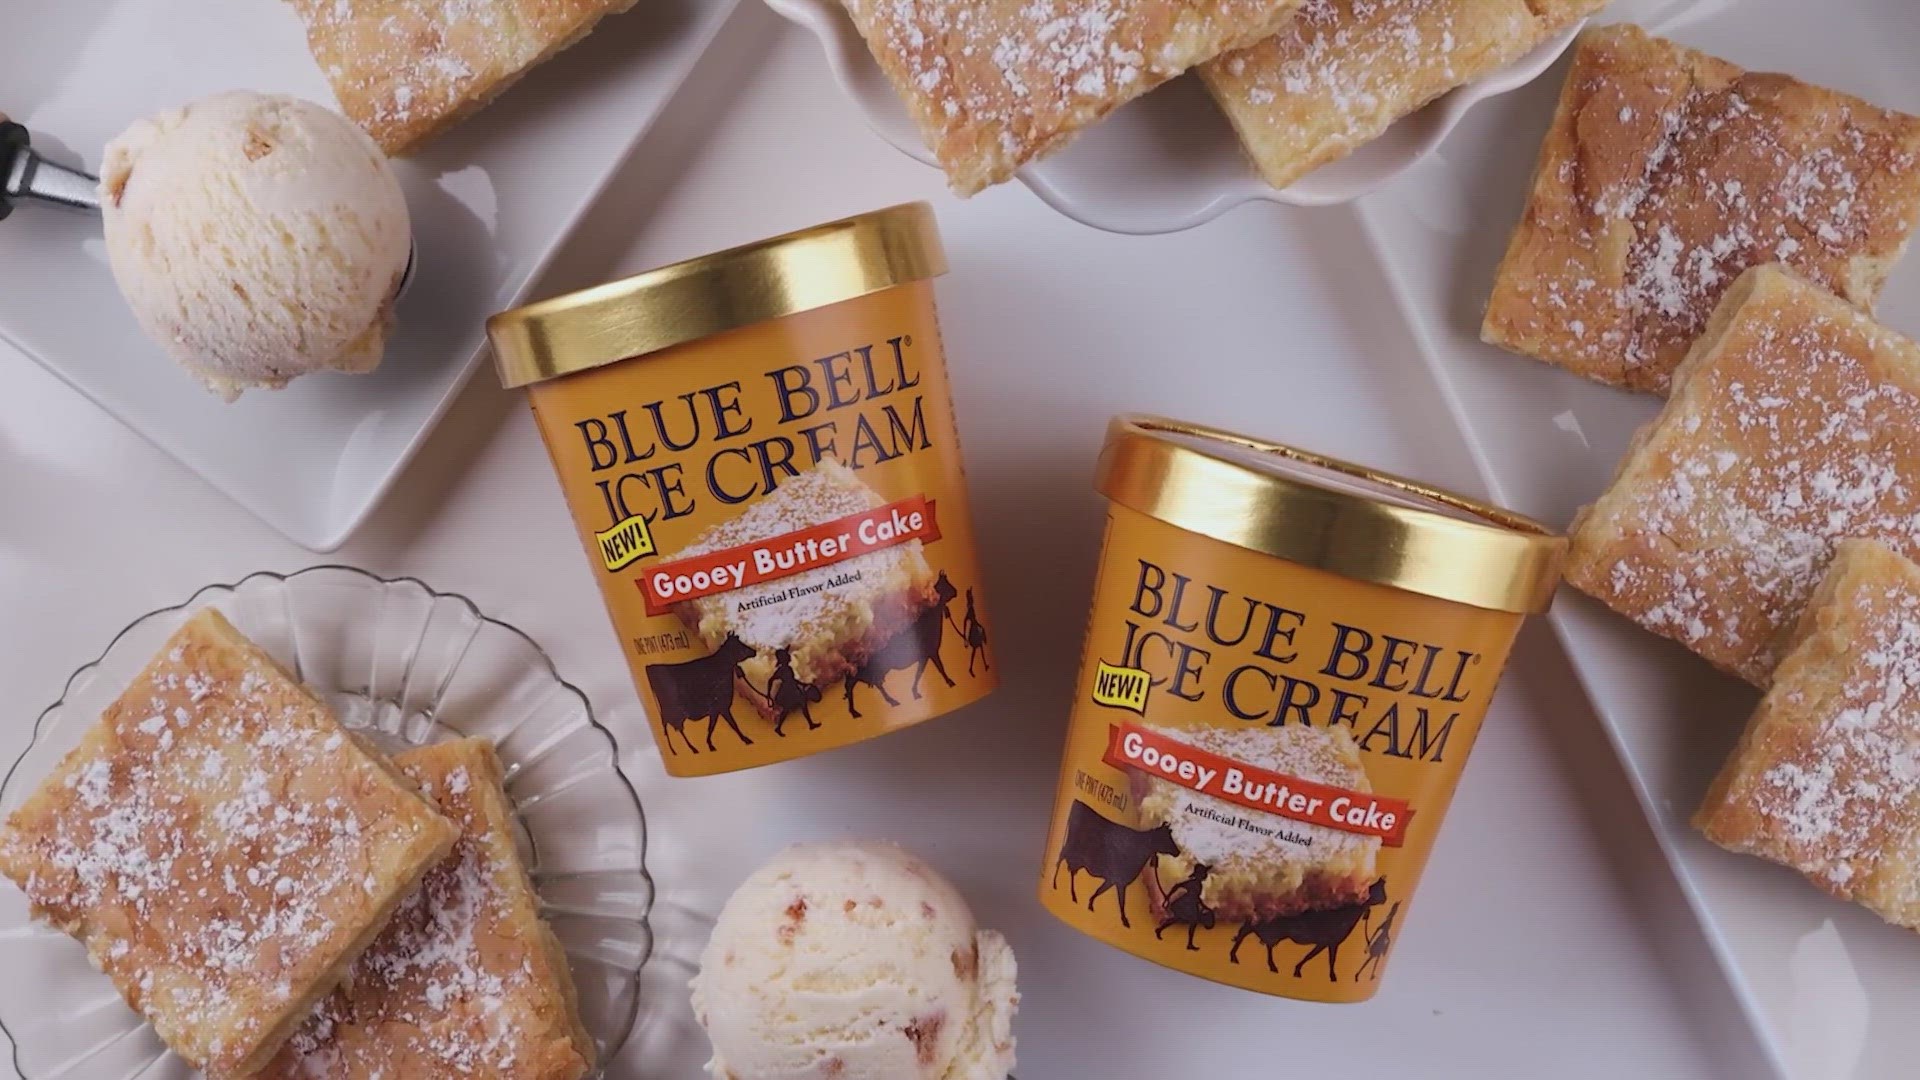 When is Blue Bell ice cream coming to St. Louis?